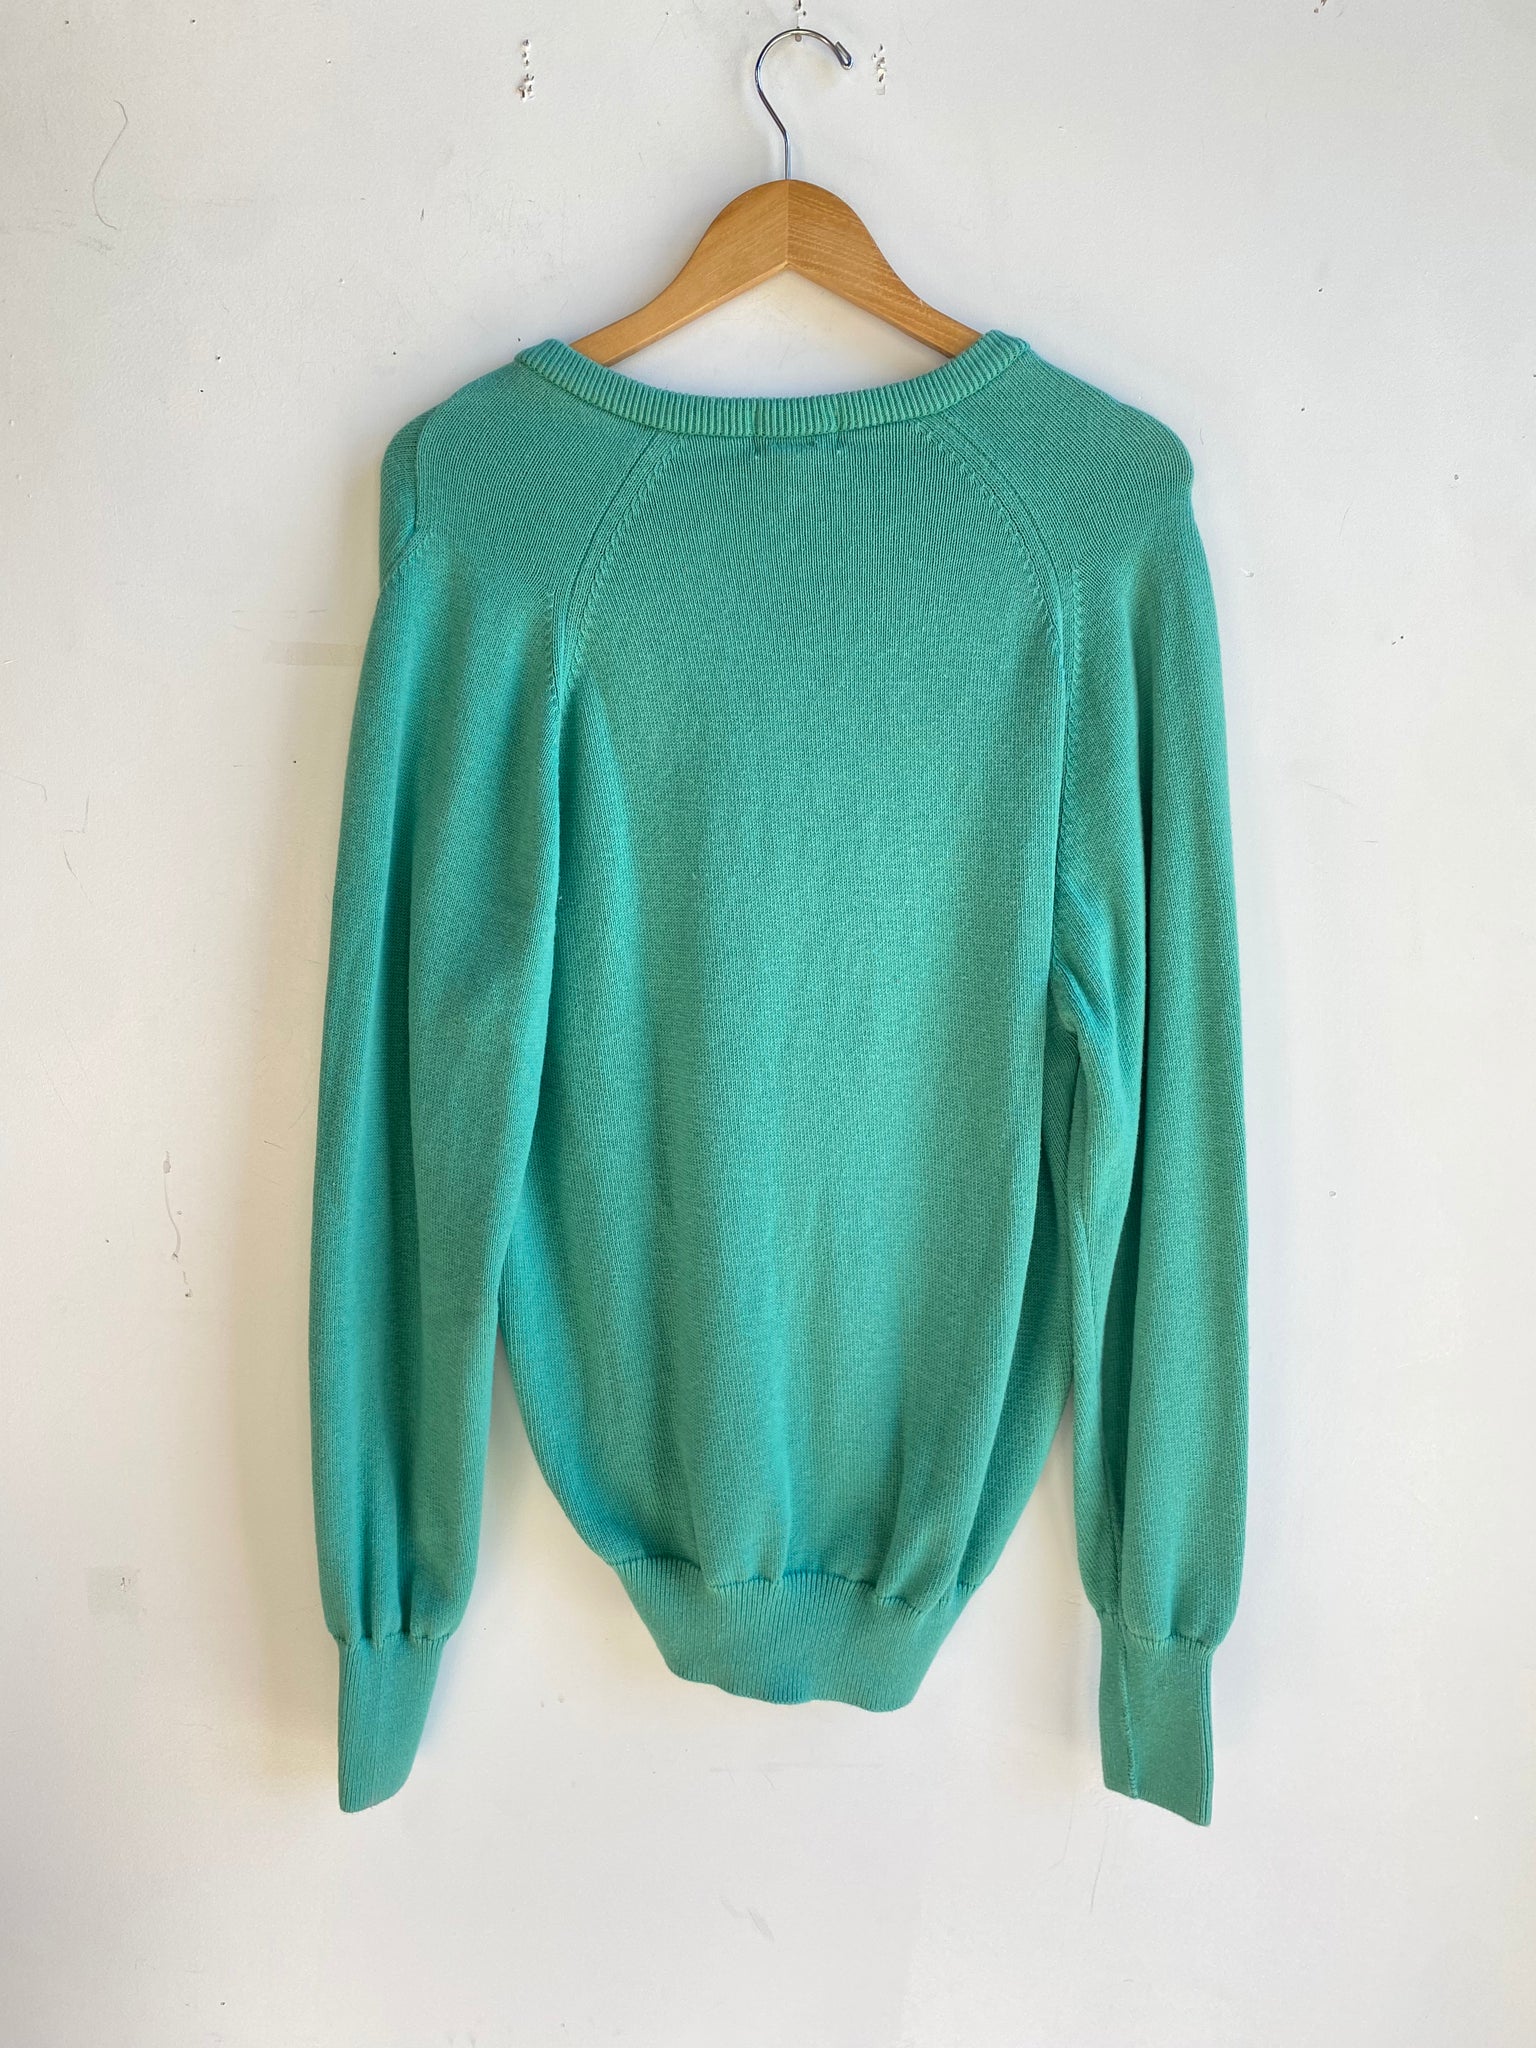 Turquoise Izod Knit Cotton Pullover